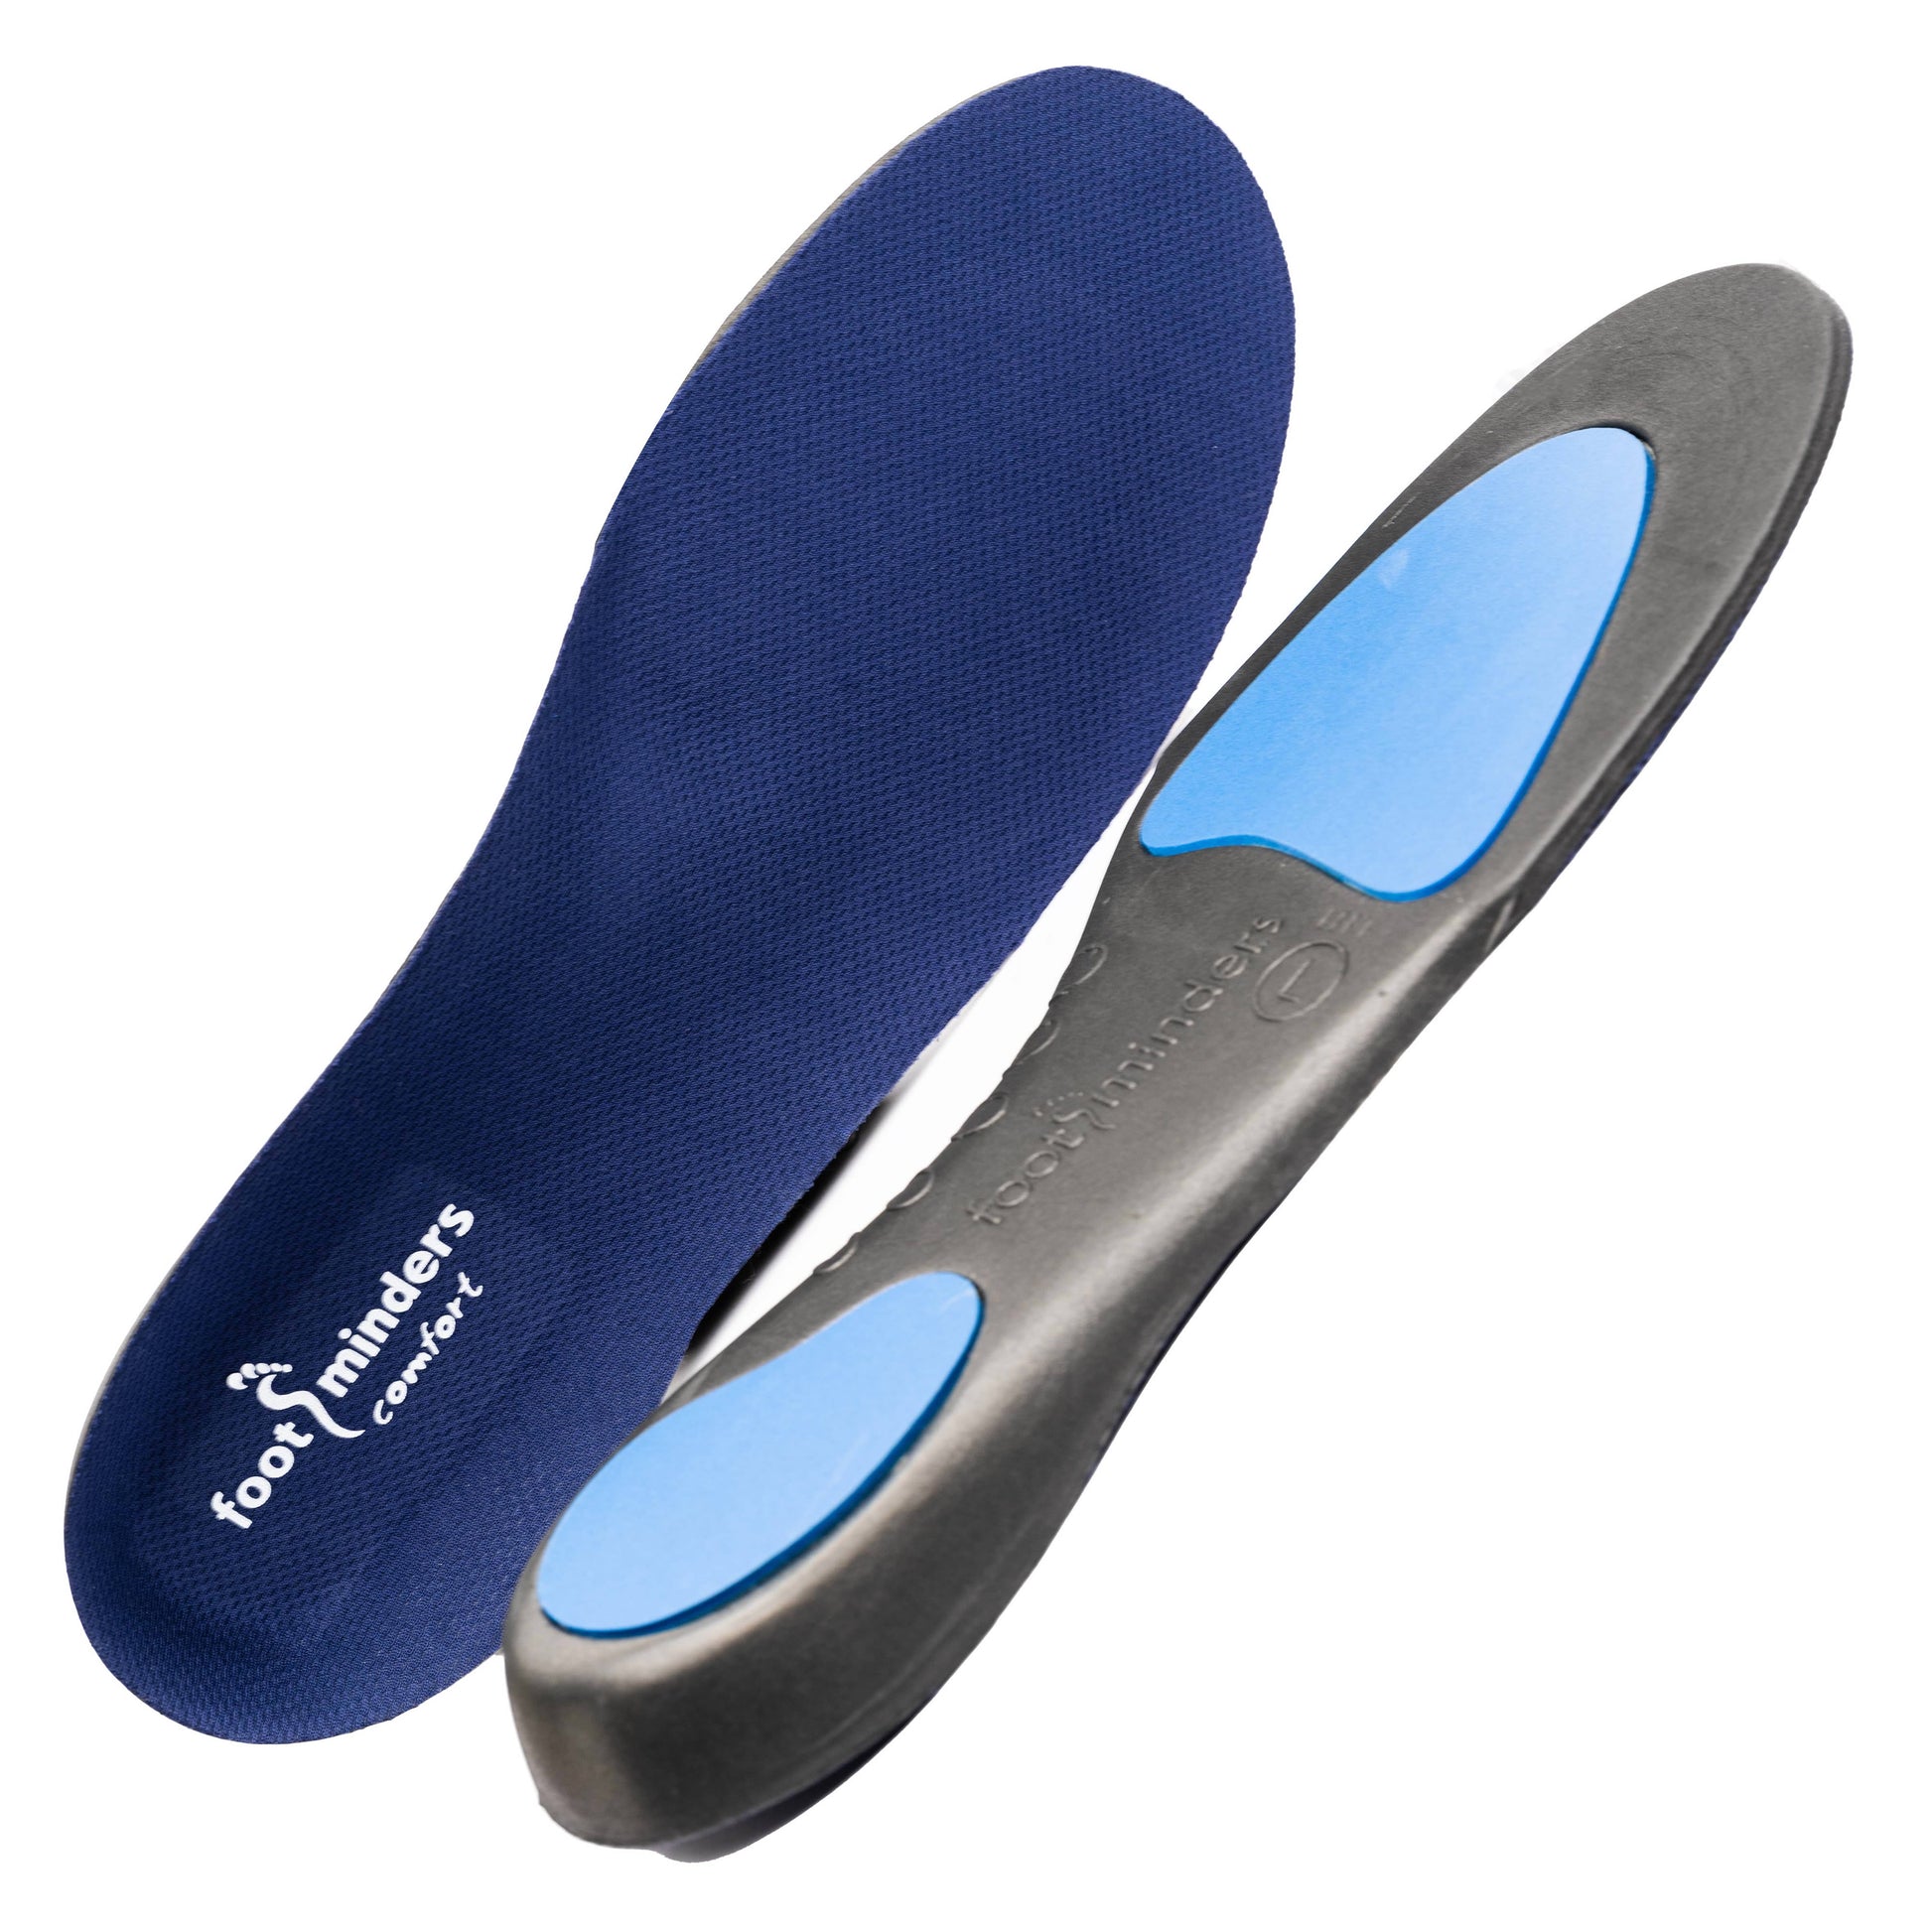 Orthotic arch support insoles for sports shoes and work boots